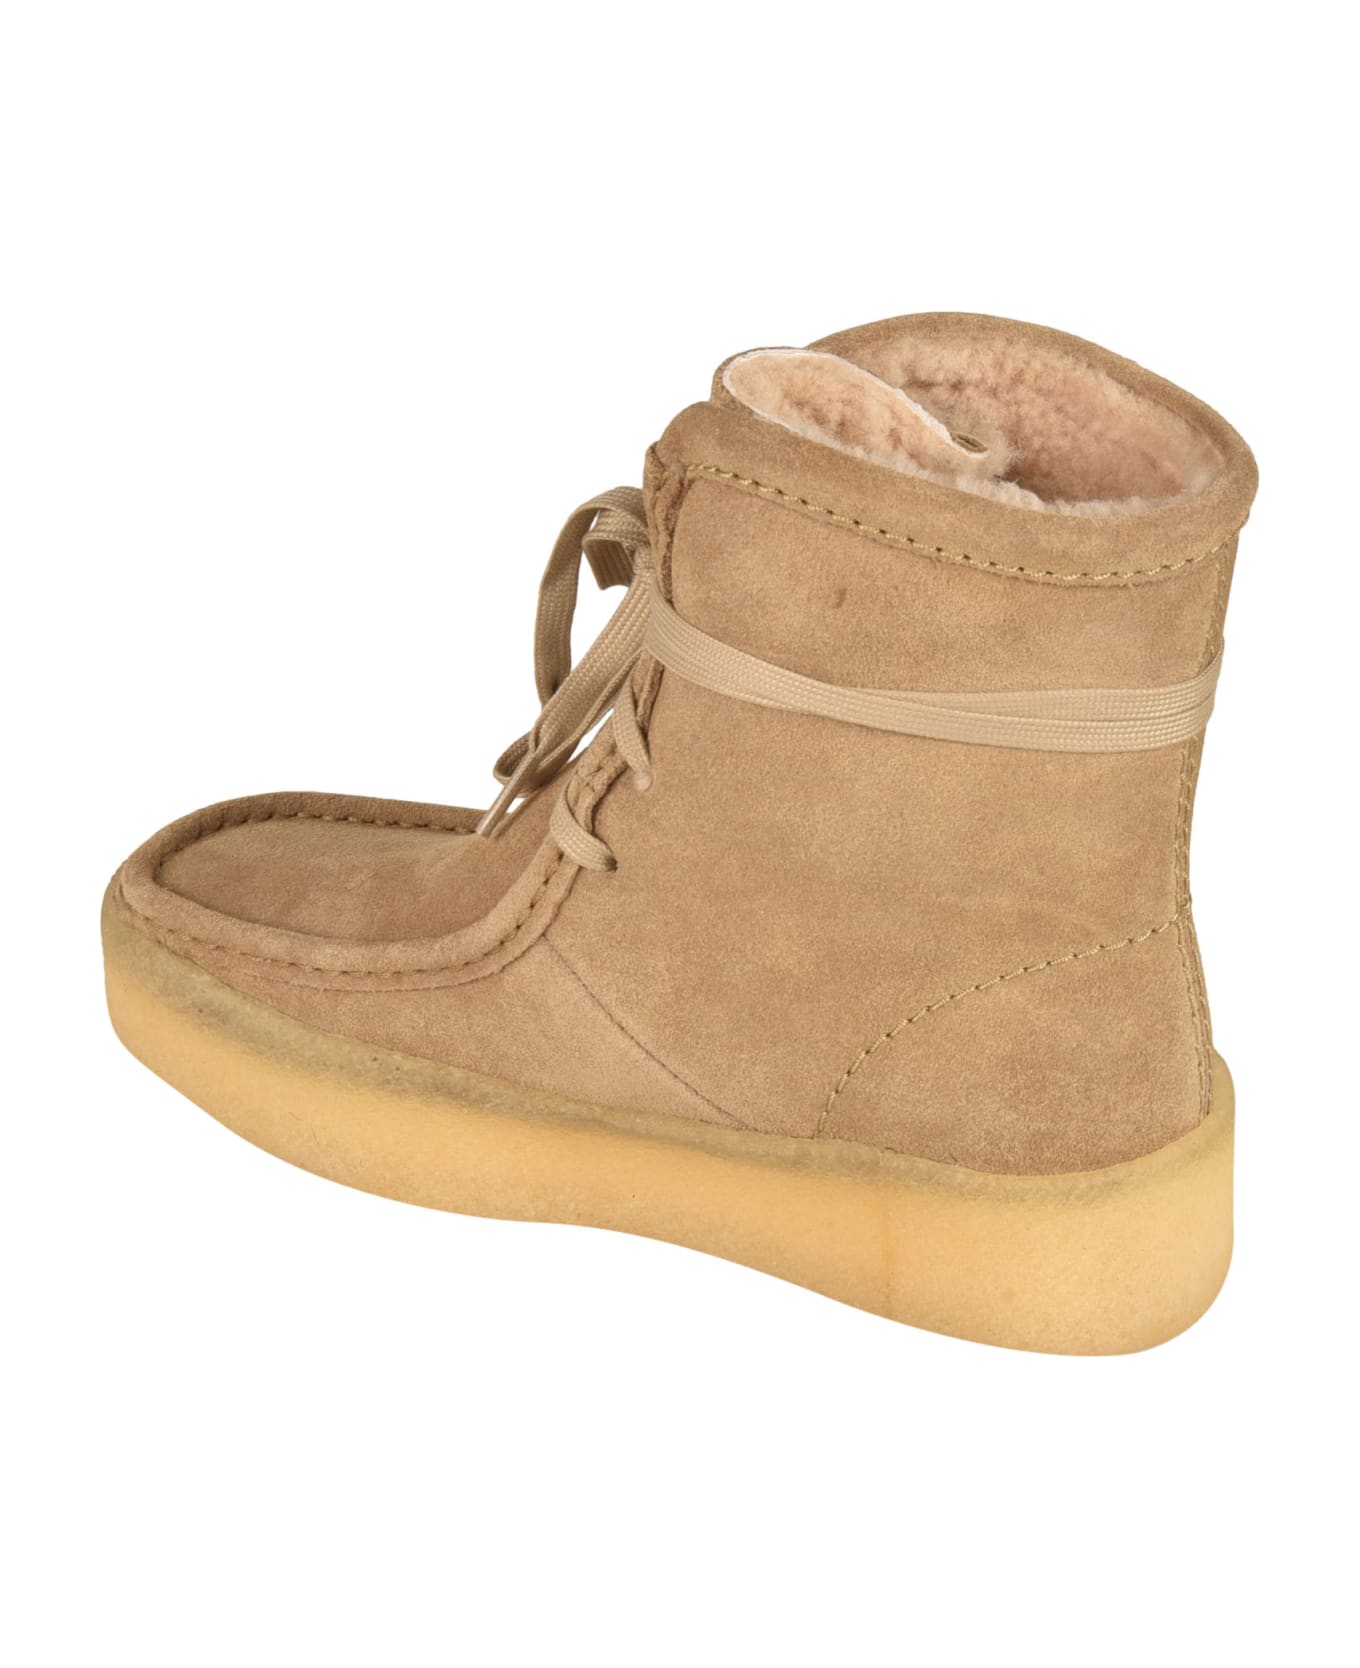 Clarks Wallabee Cup High Boots - Light Tan